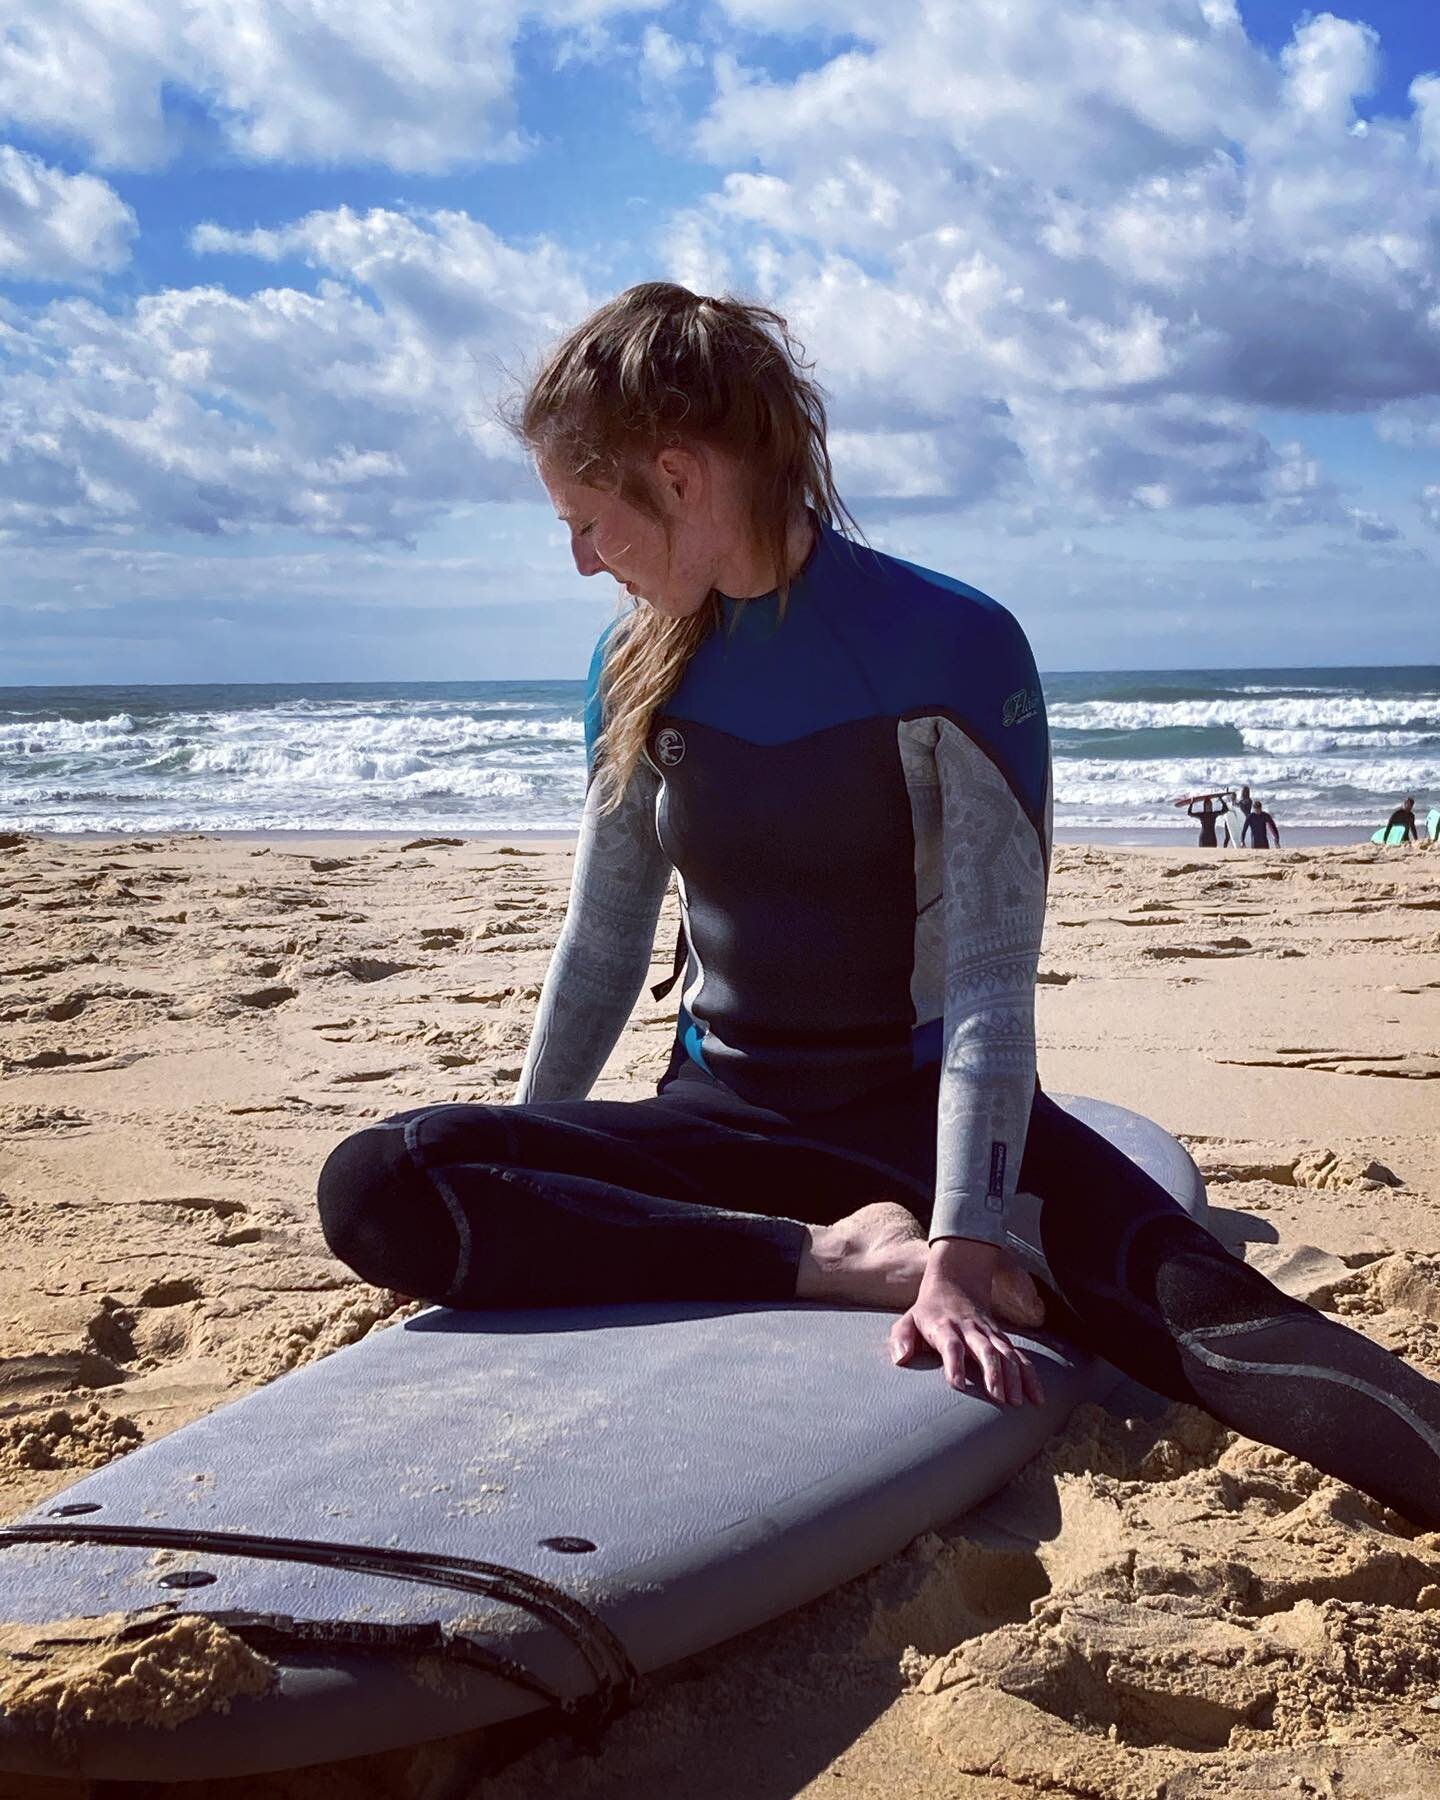 counting down the days to be back near the big atlantic
.

being close to the ocean is when i drop into myself the most naturally &amp; effortlessly 
.
hard feeling to describe - when you know, you know
.
.
.
.
#surf #yoga #oceanlove #yogaatthebeach 